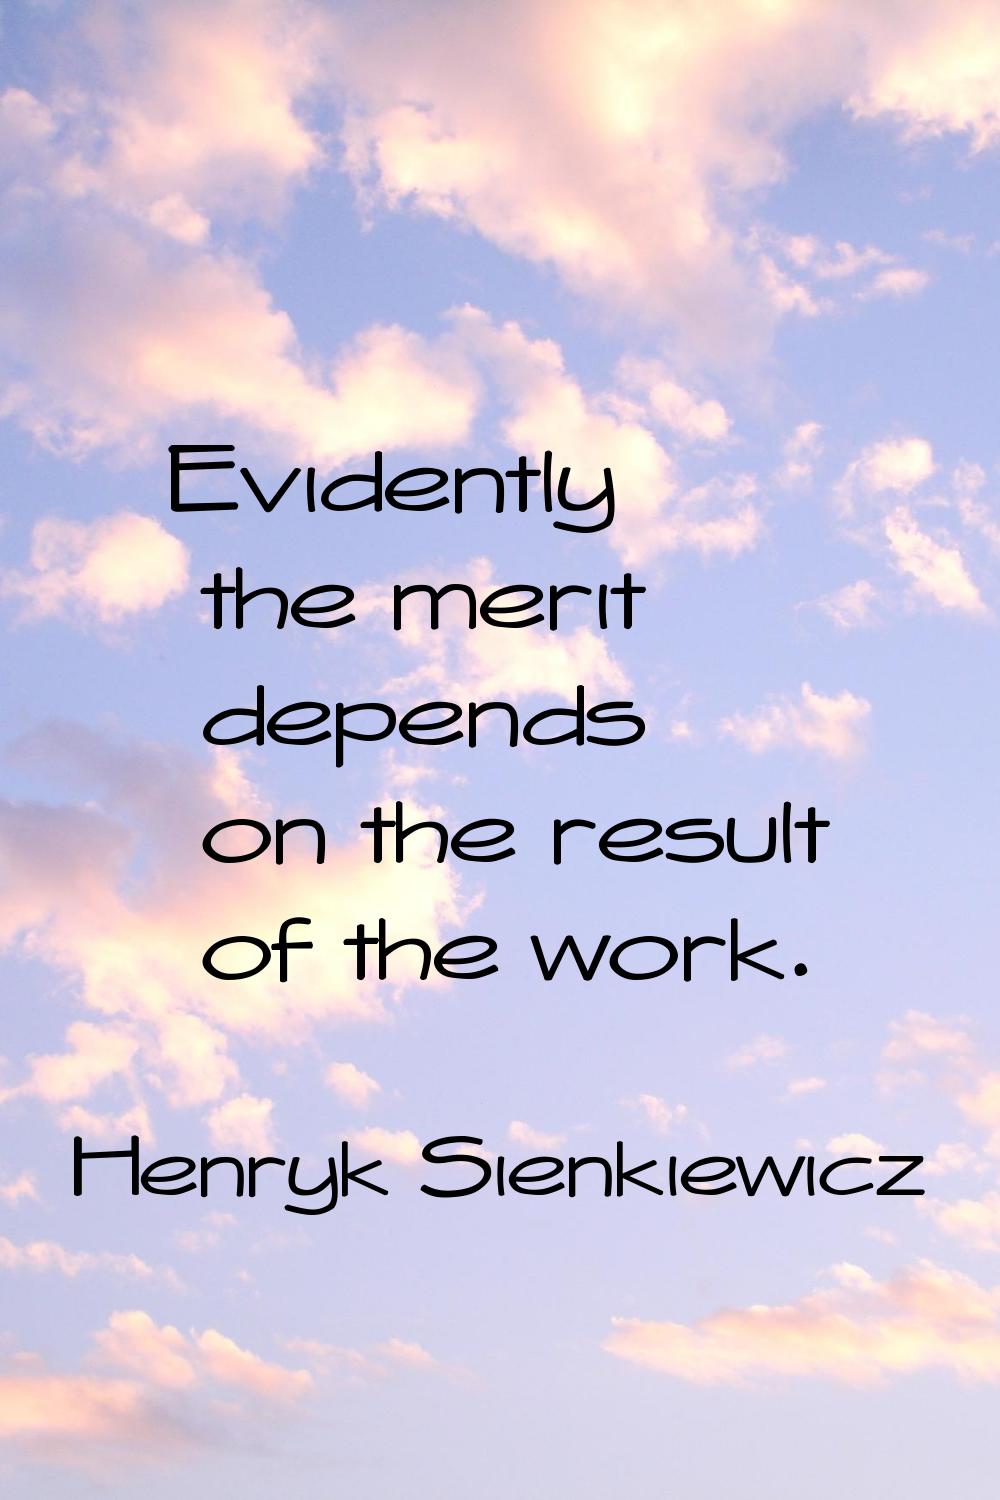 Evidently the merit depends on the result of the work.